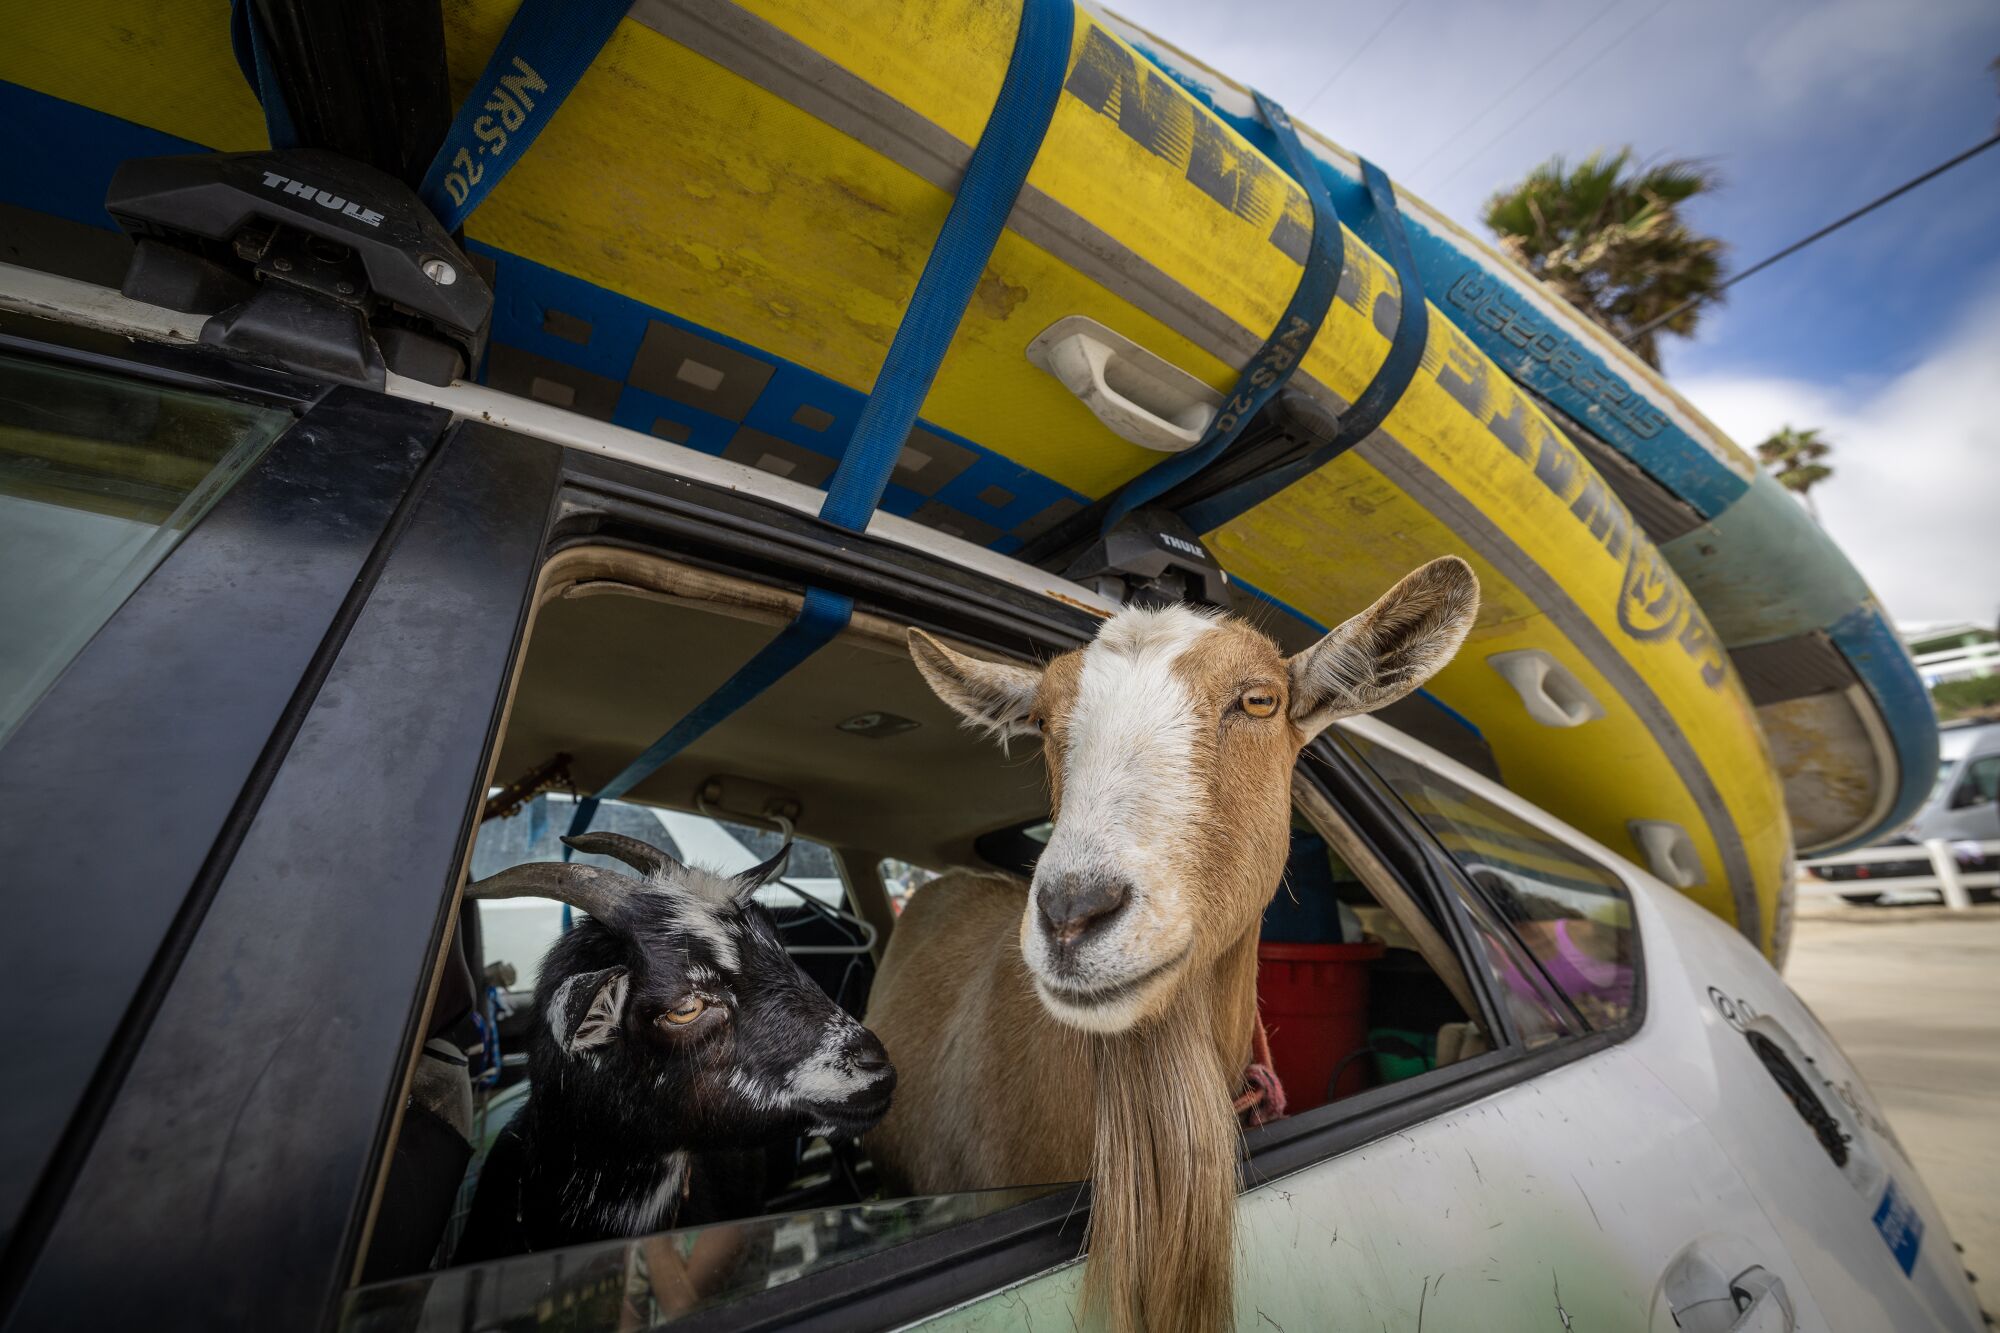 Surfing goats Chupacabrah, 1, and Grover, 11, check out the waves from the goat mobile.